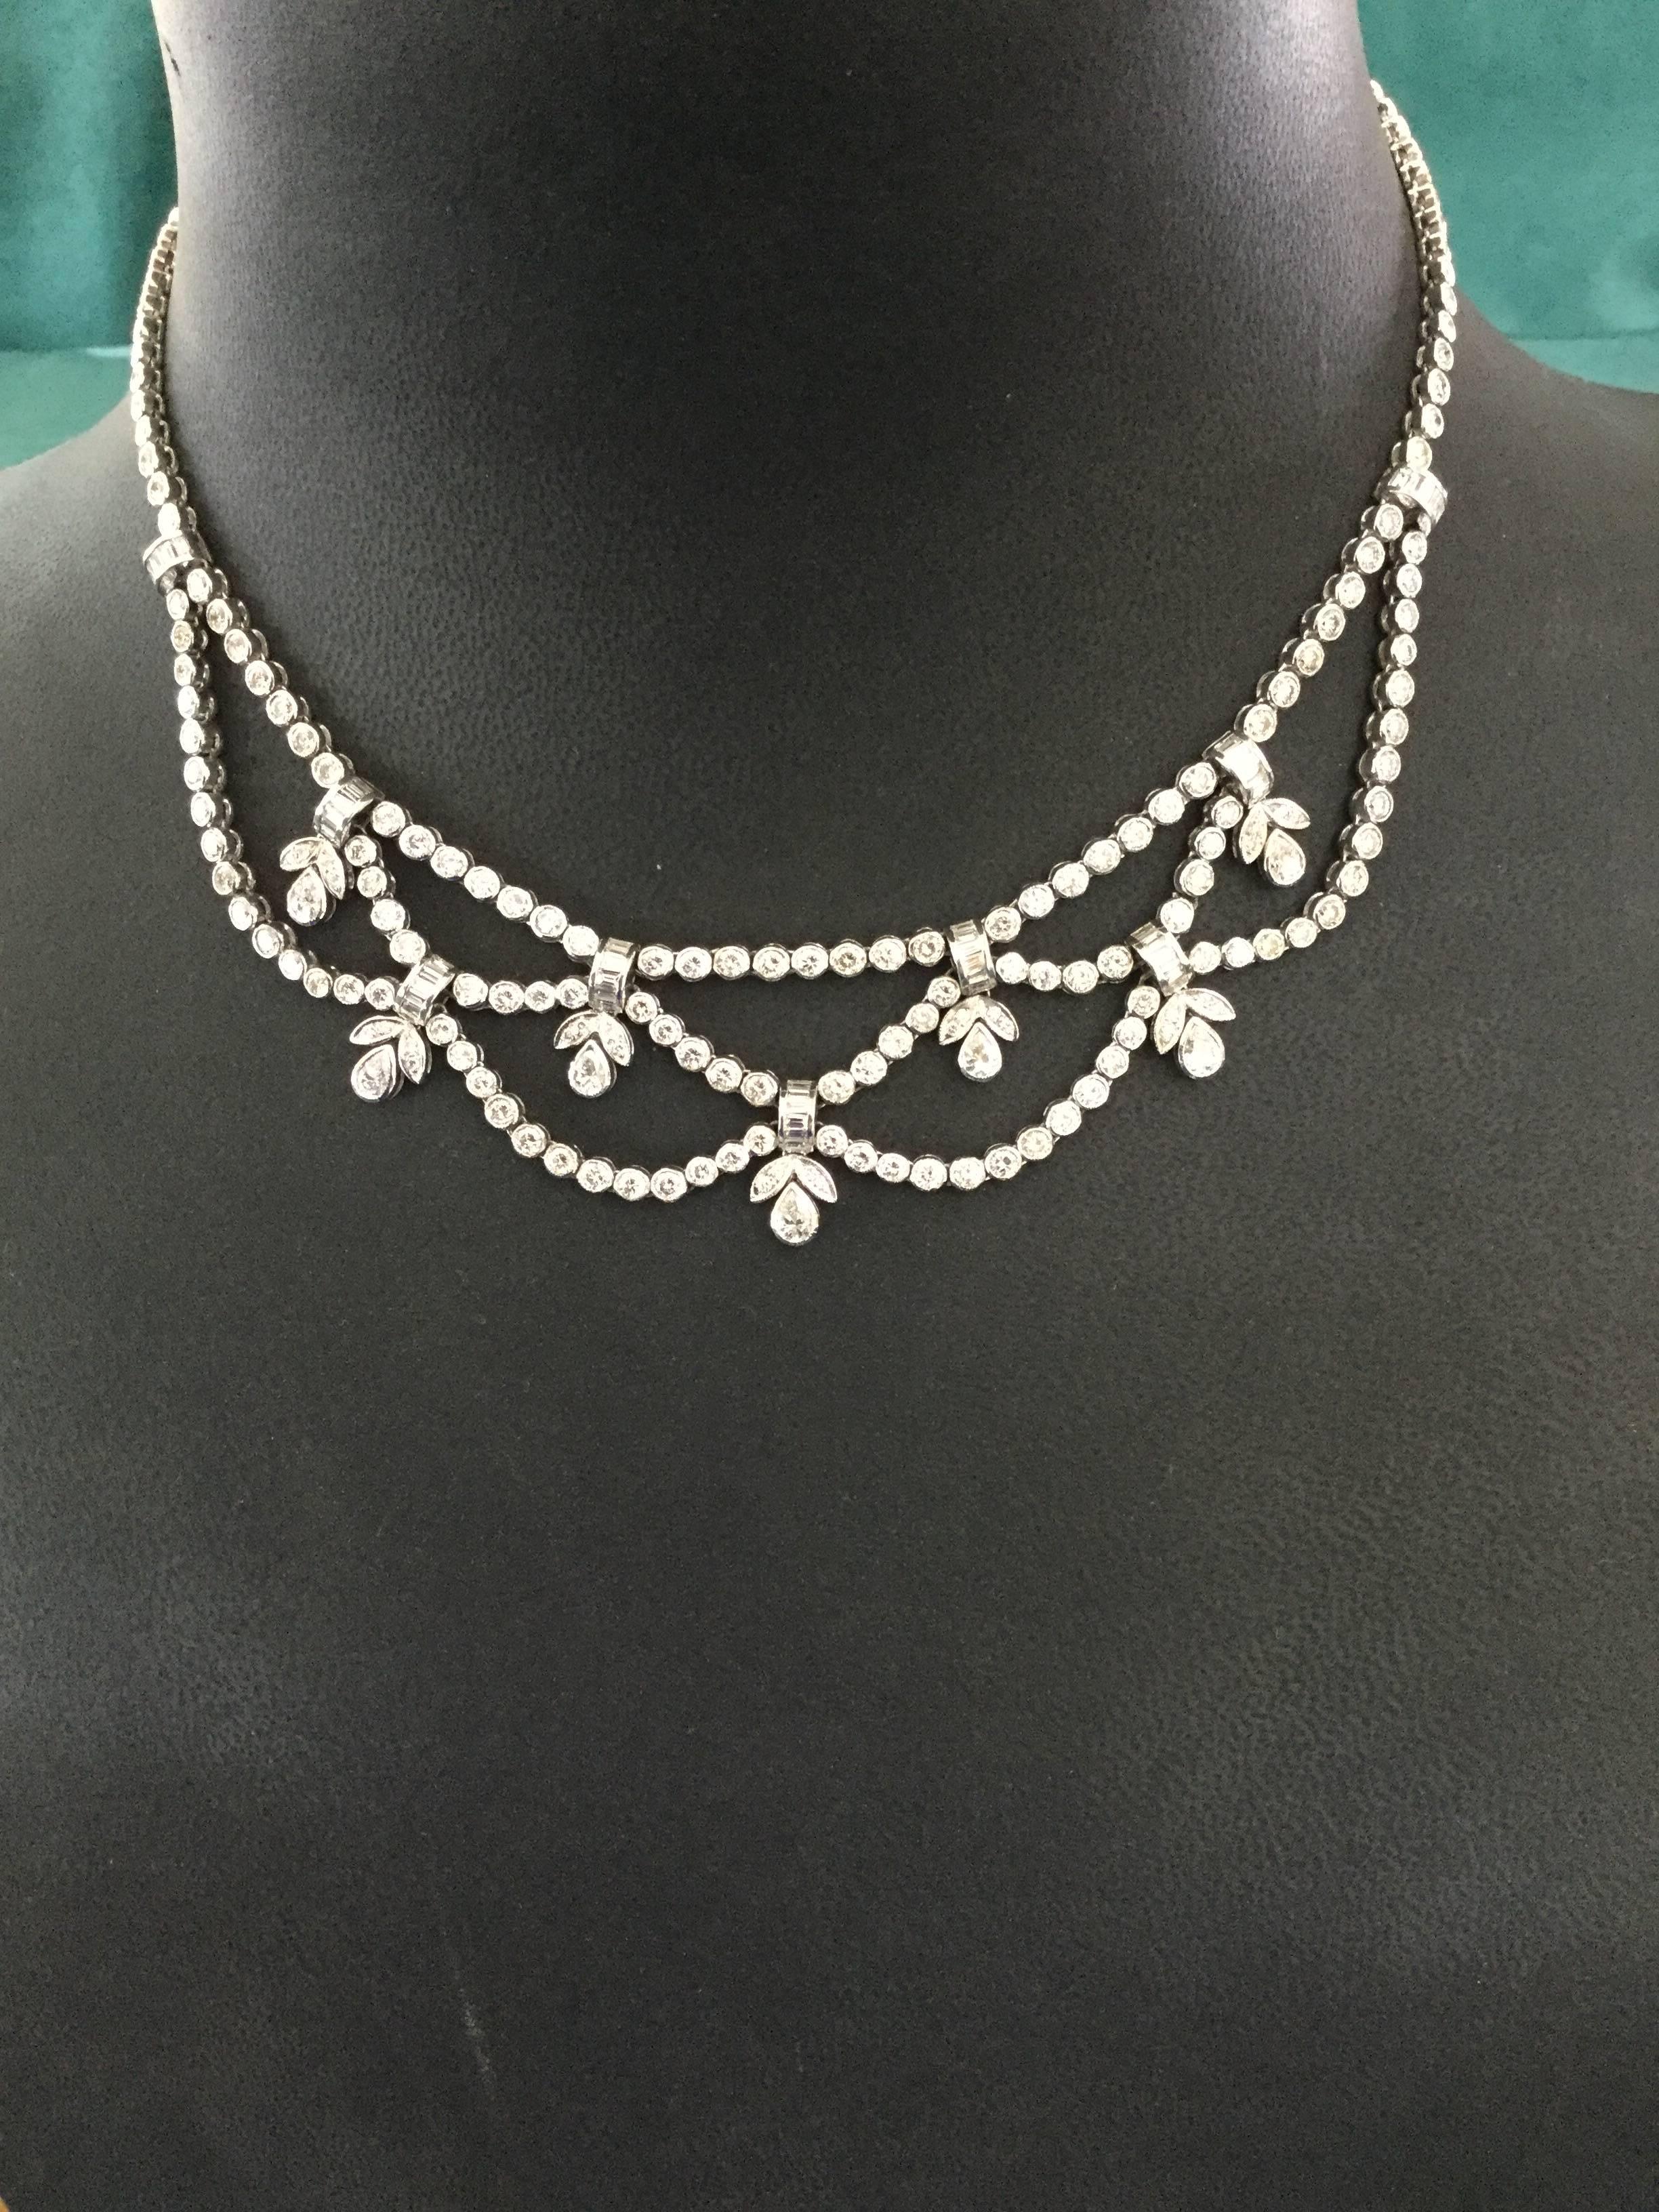 Formal Diamond Necklace In Excellent Condition For Sale In Spartanburg, SC